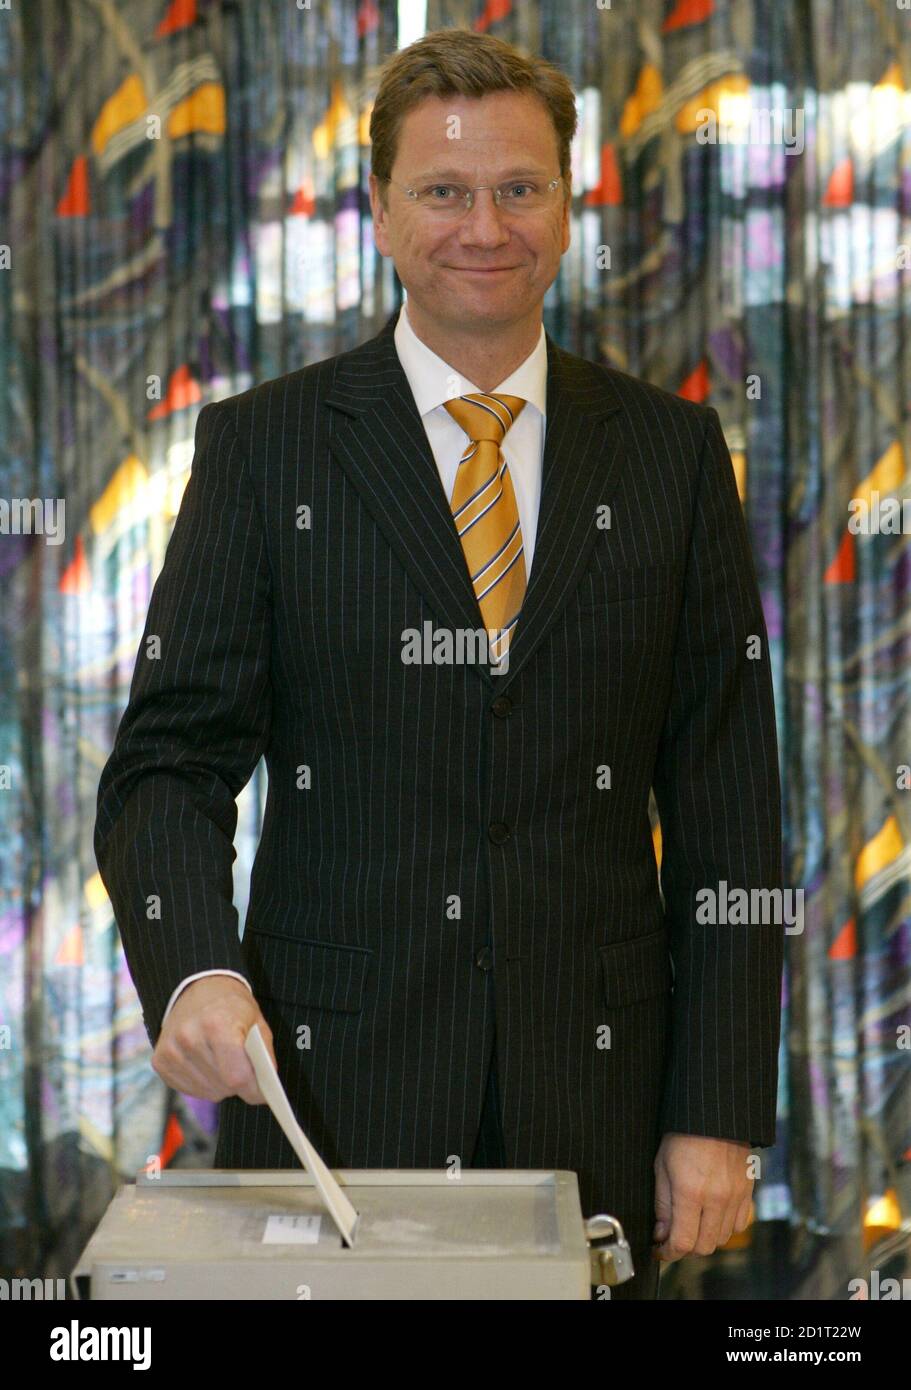 Guido Westerwelle, leader of the German liberal Free Democratic Party (FDP) casts his vote at a polling station in the western German city of Bonn September 18, 2005. [Voting began in Germany's closely fought election on Sunday with millions of undecided voters holding the key to a result that will have major implications for economic reform in Europe.] Stock Photo